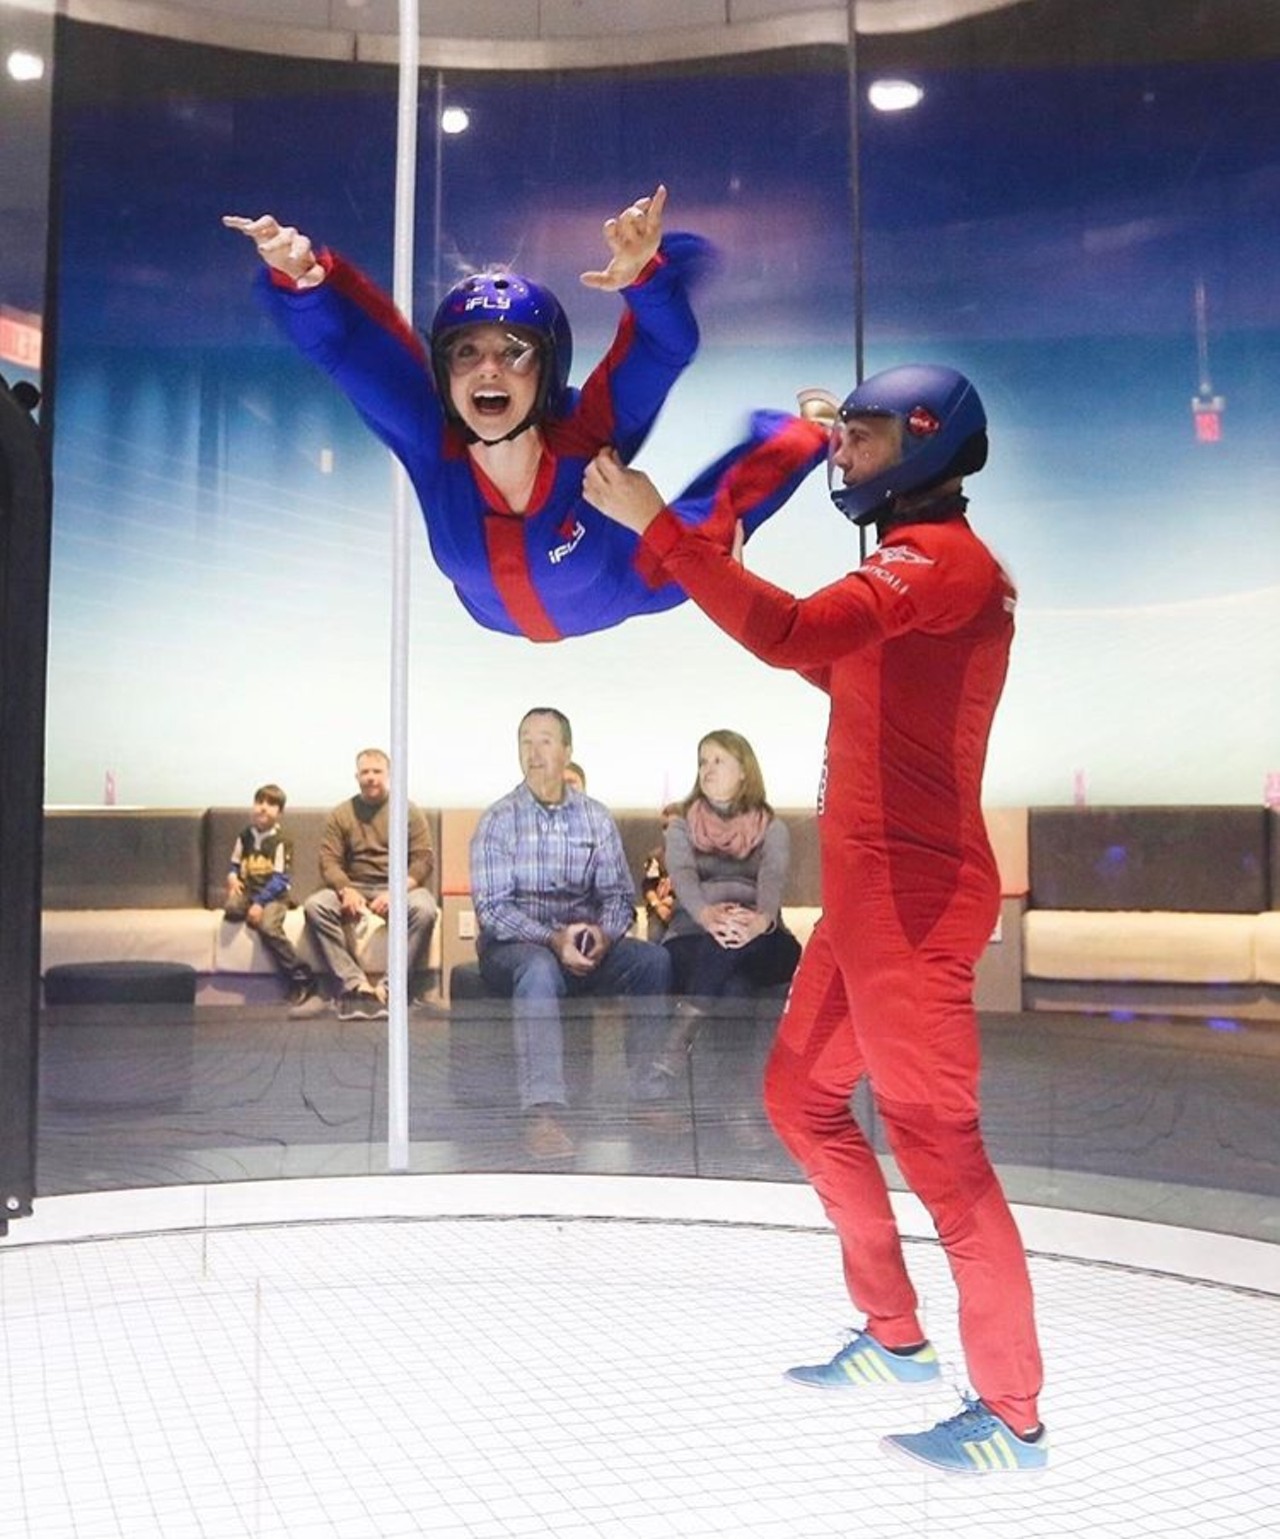 Indoor Skydiving at iFly
15915 I-10, (210) 763-4359, iflyworld.com
iFly combines the thrill of jumping out of an airplane and the safety of staying close to the ground to provide an adrenaline-packed experience. 
Photo via Instagram / lovetaymack